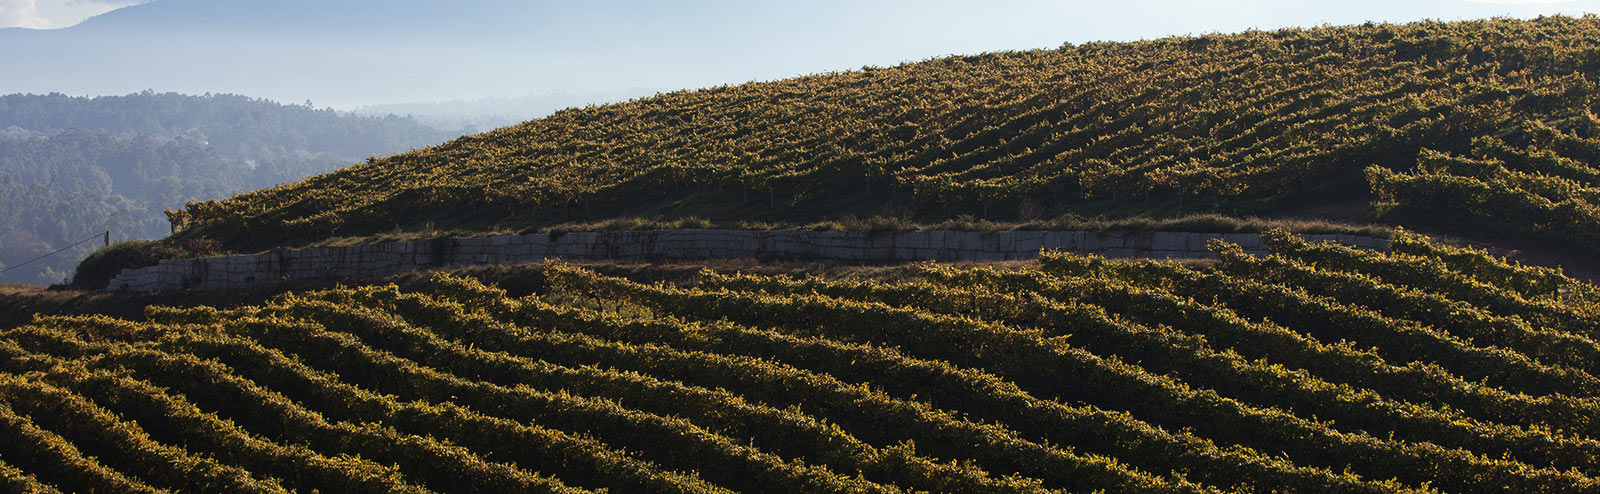 Panoramic view of the Fillaboa vineyards